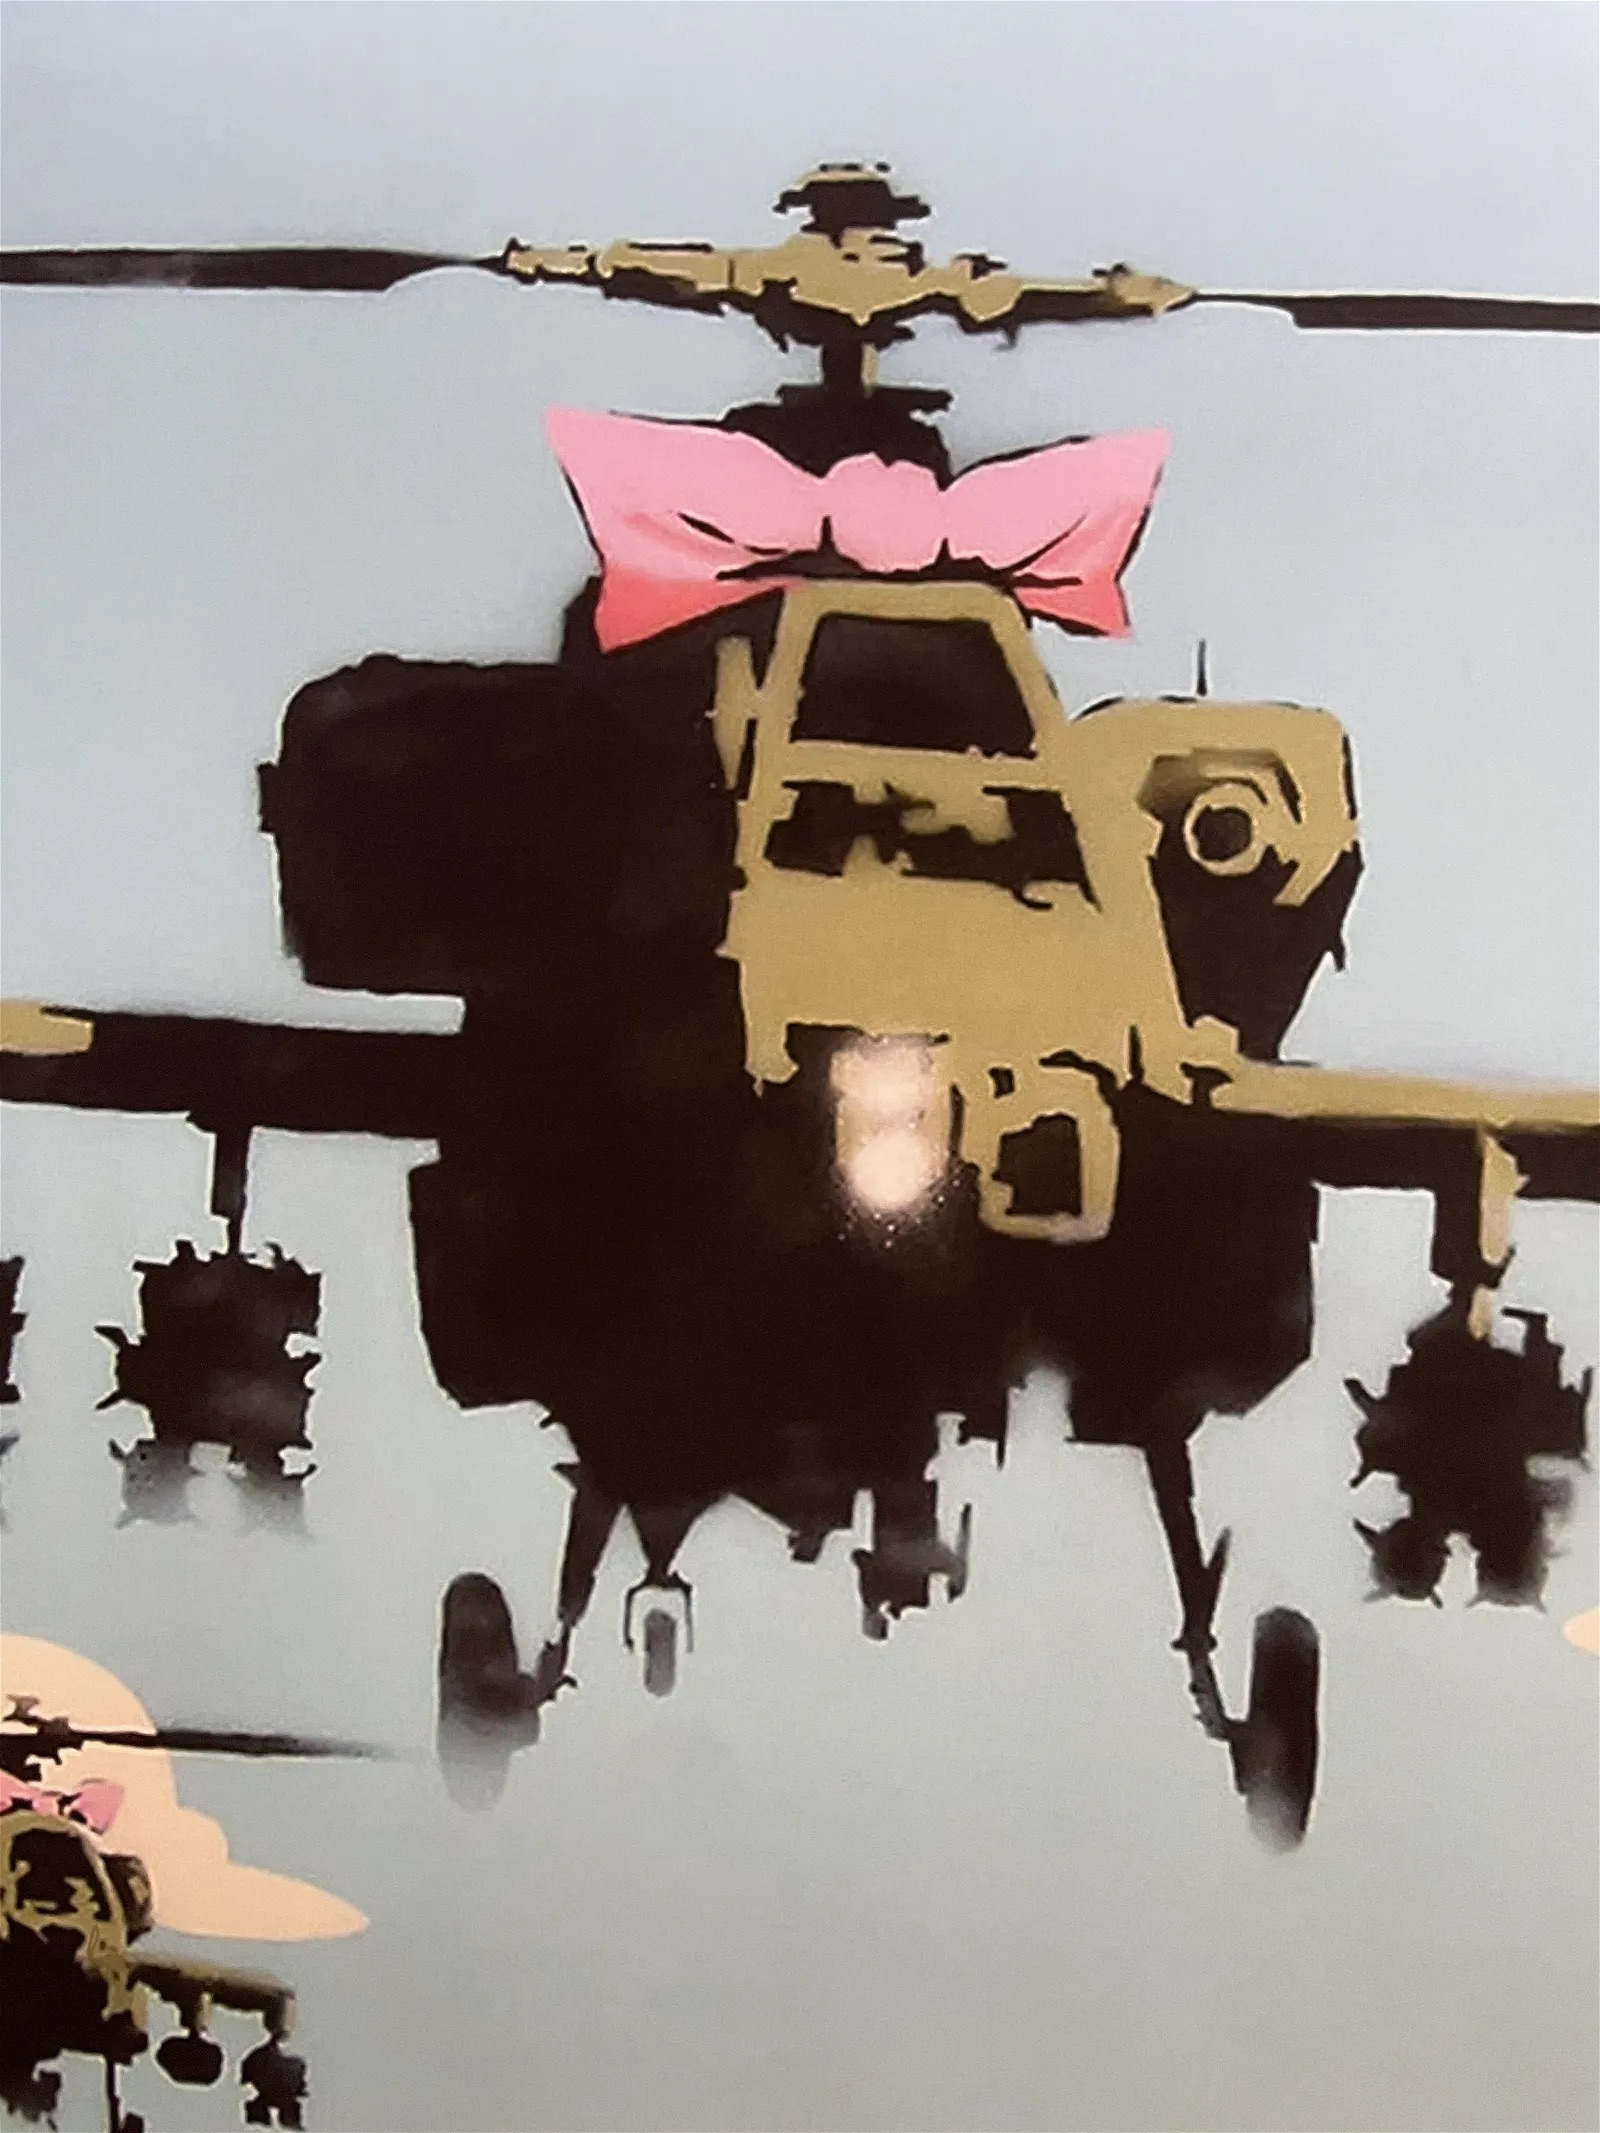 Banksy "Helicopter" Offset Lithograph - Image 5 of 8